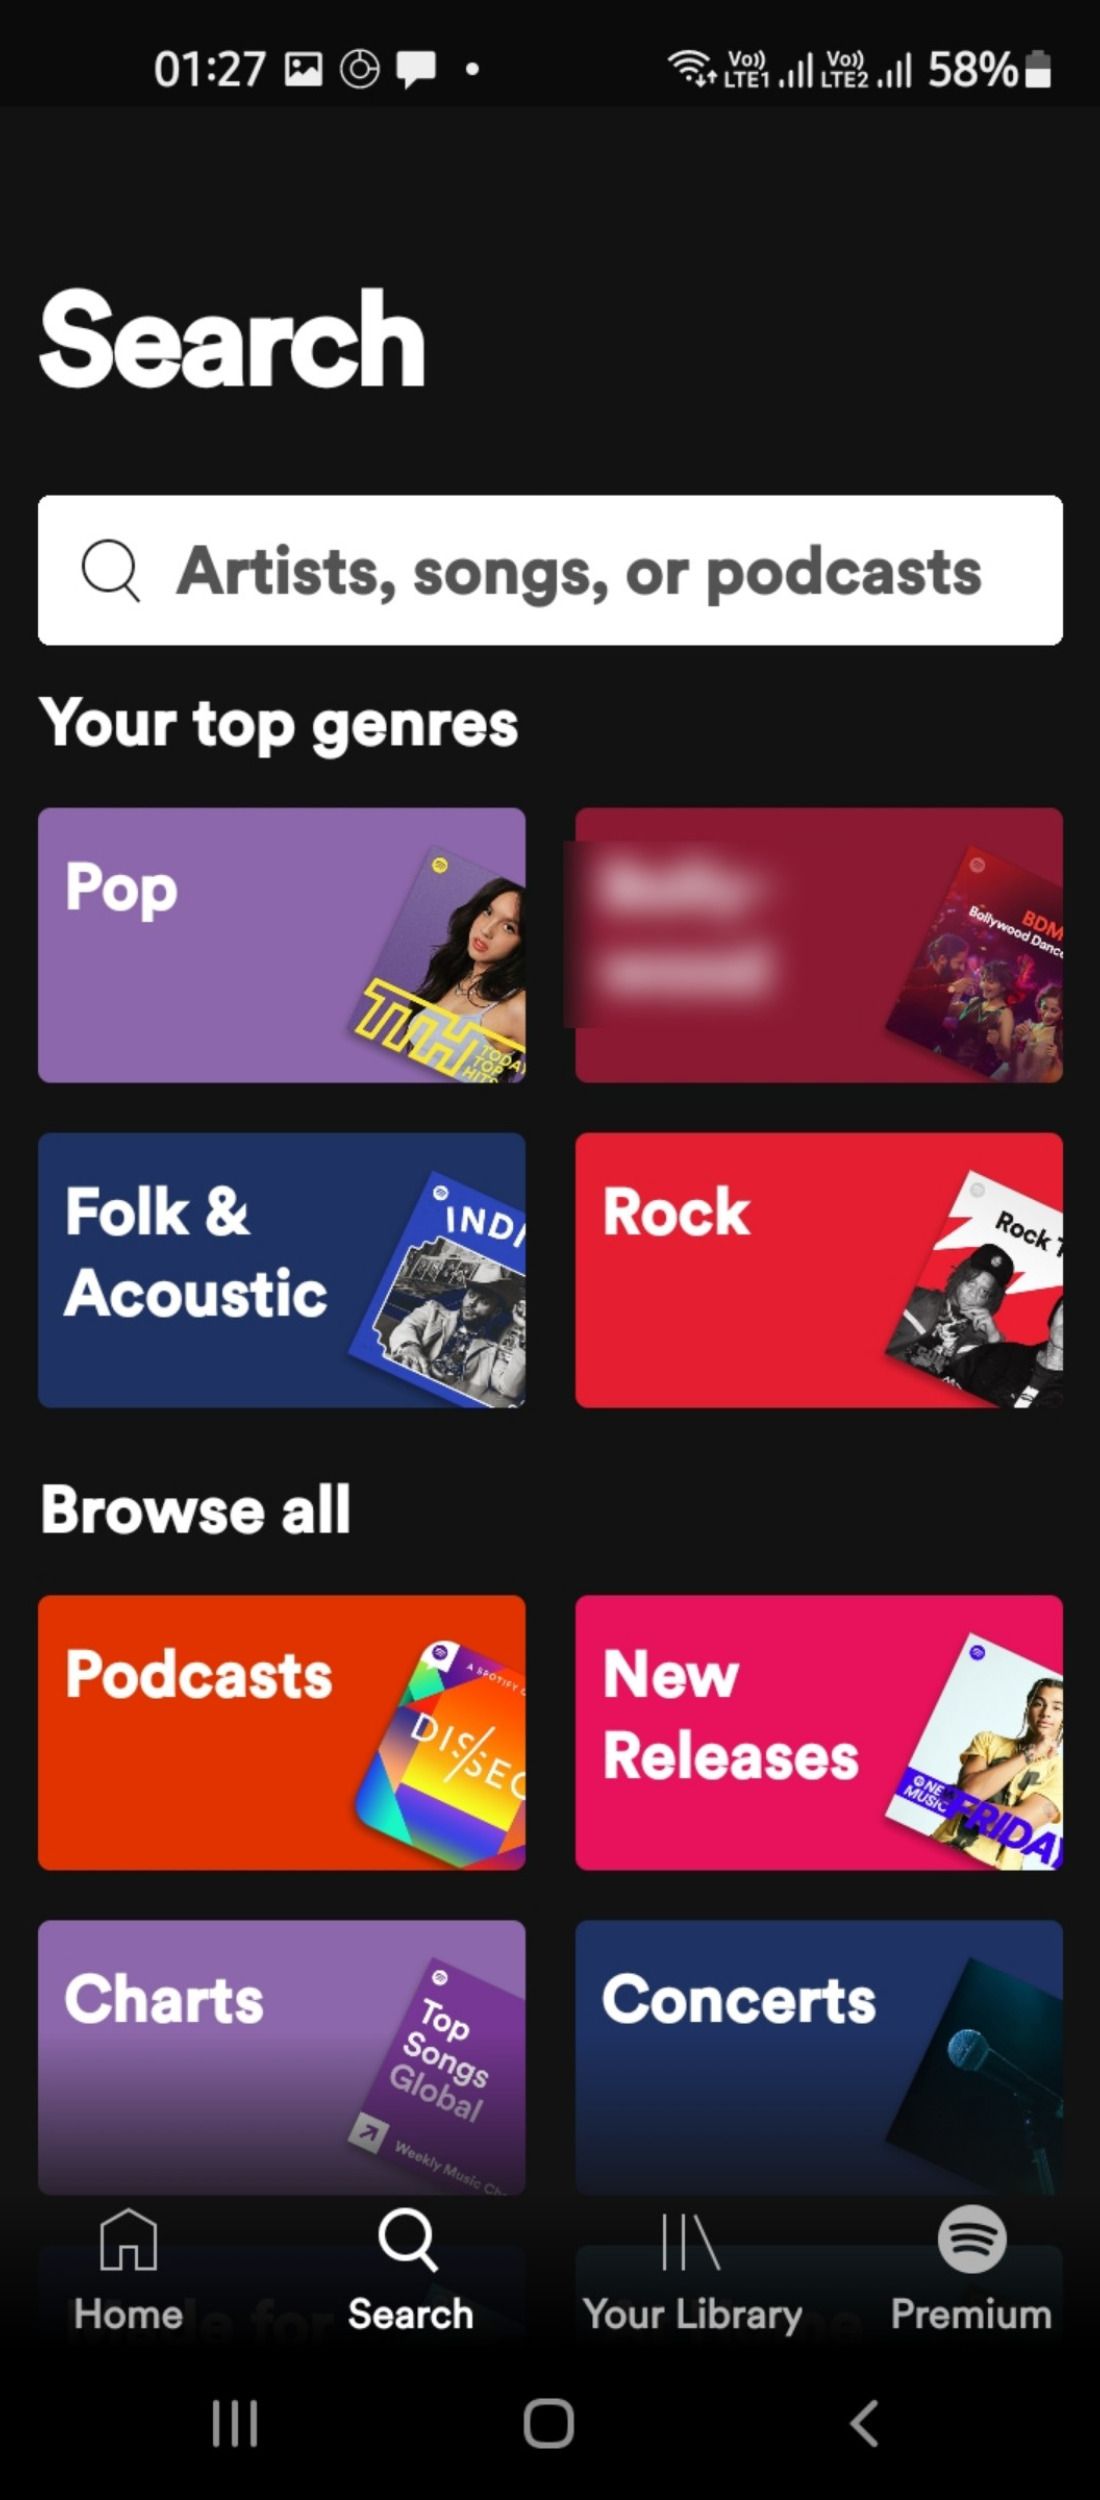 Search functionality in Spotify